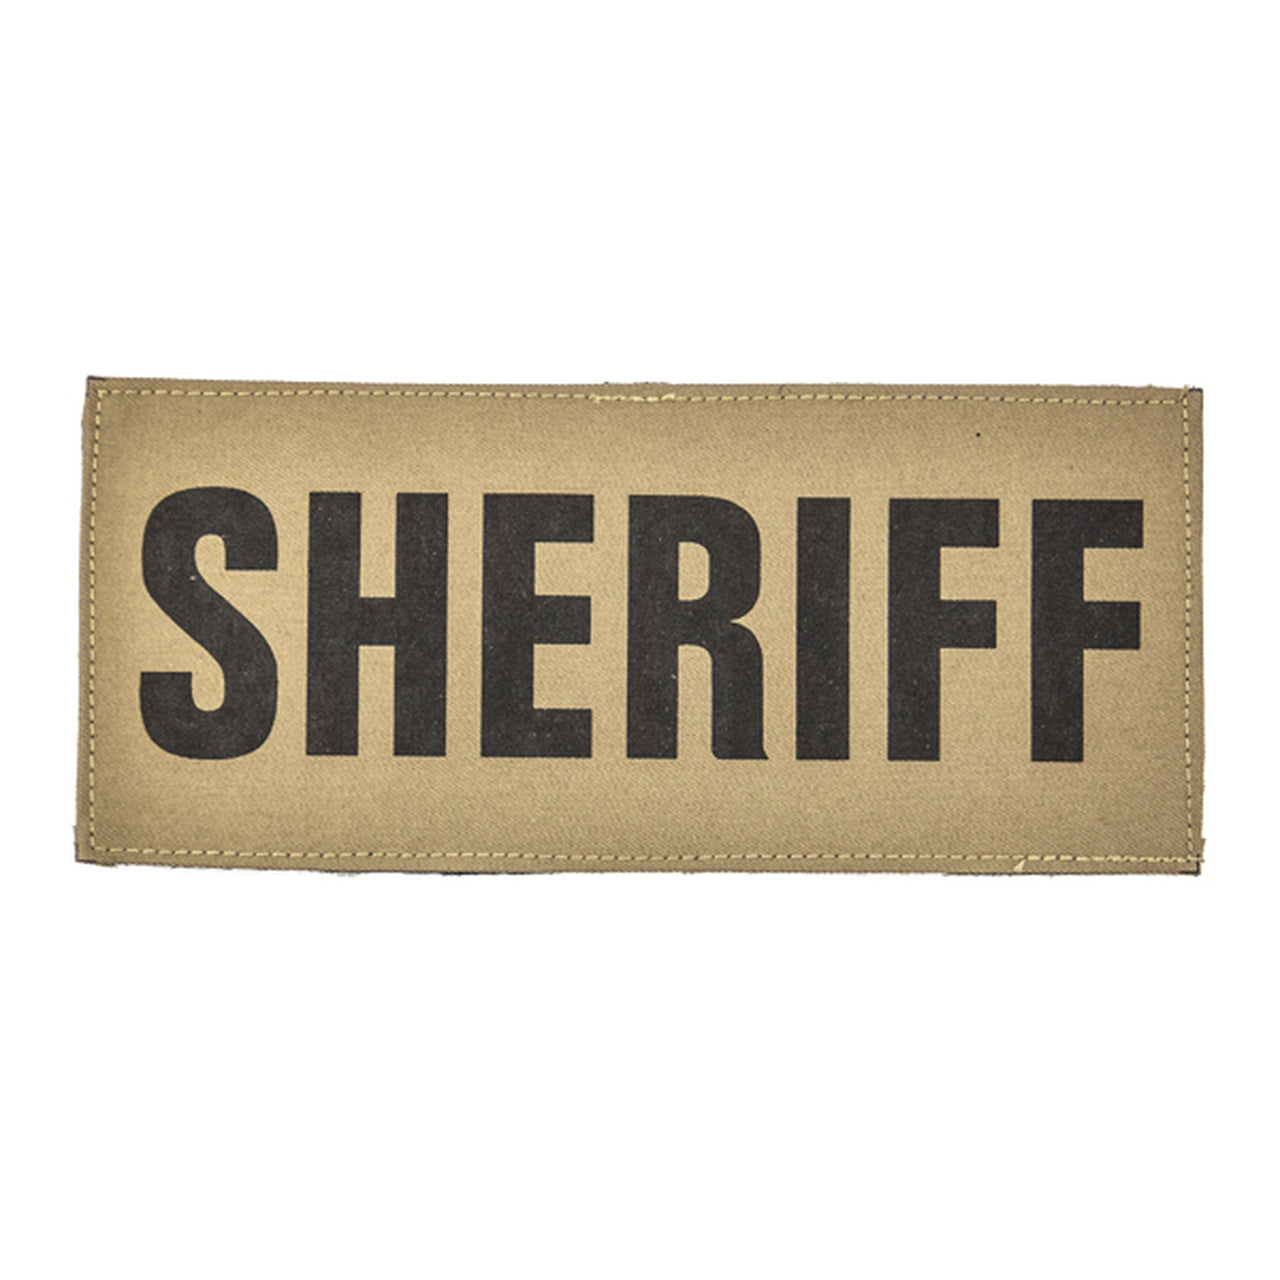 SHELLBACK TACTICAL 2 X 5 INCH ID PLACARD WITH HOOK BACK